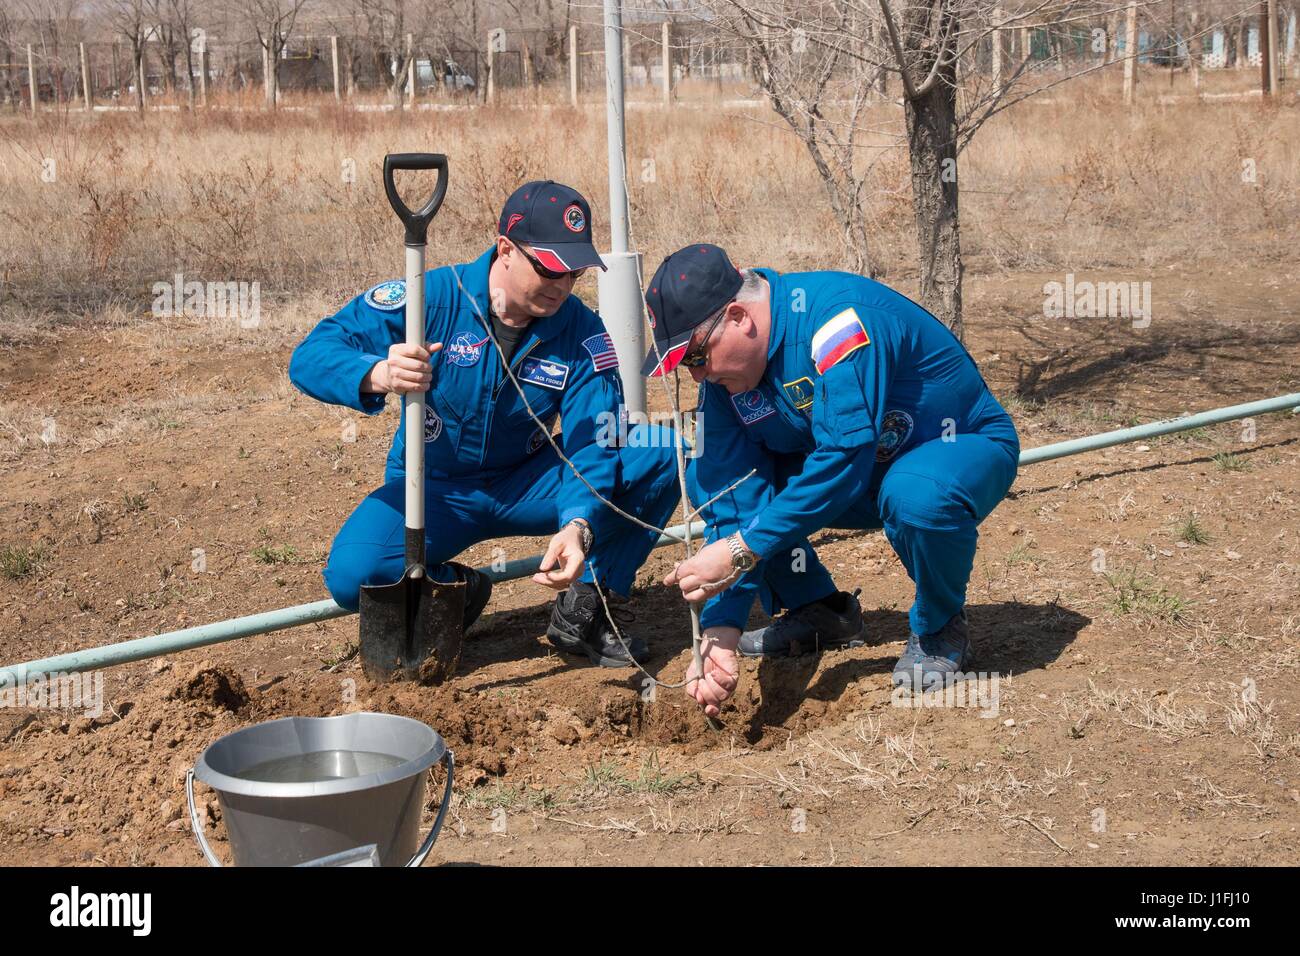 NASA International Space Station Expedition 51 Soyuz MS-04 mission prime crew members American astronaut Jack Fischer (left), and Russian cosmonaut Fyodor Yurchikhin of Roscosmos plant a tree in Fischers name during a traditional pre-launch ceremony at the Cosmonaut Hotel April 13, 2017 in Baikonur, Kazakhstan.      (photo by Victor Zelentsov /NASA   via Planetpix) Stock Photo